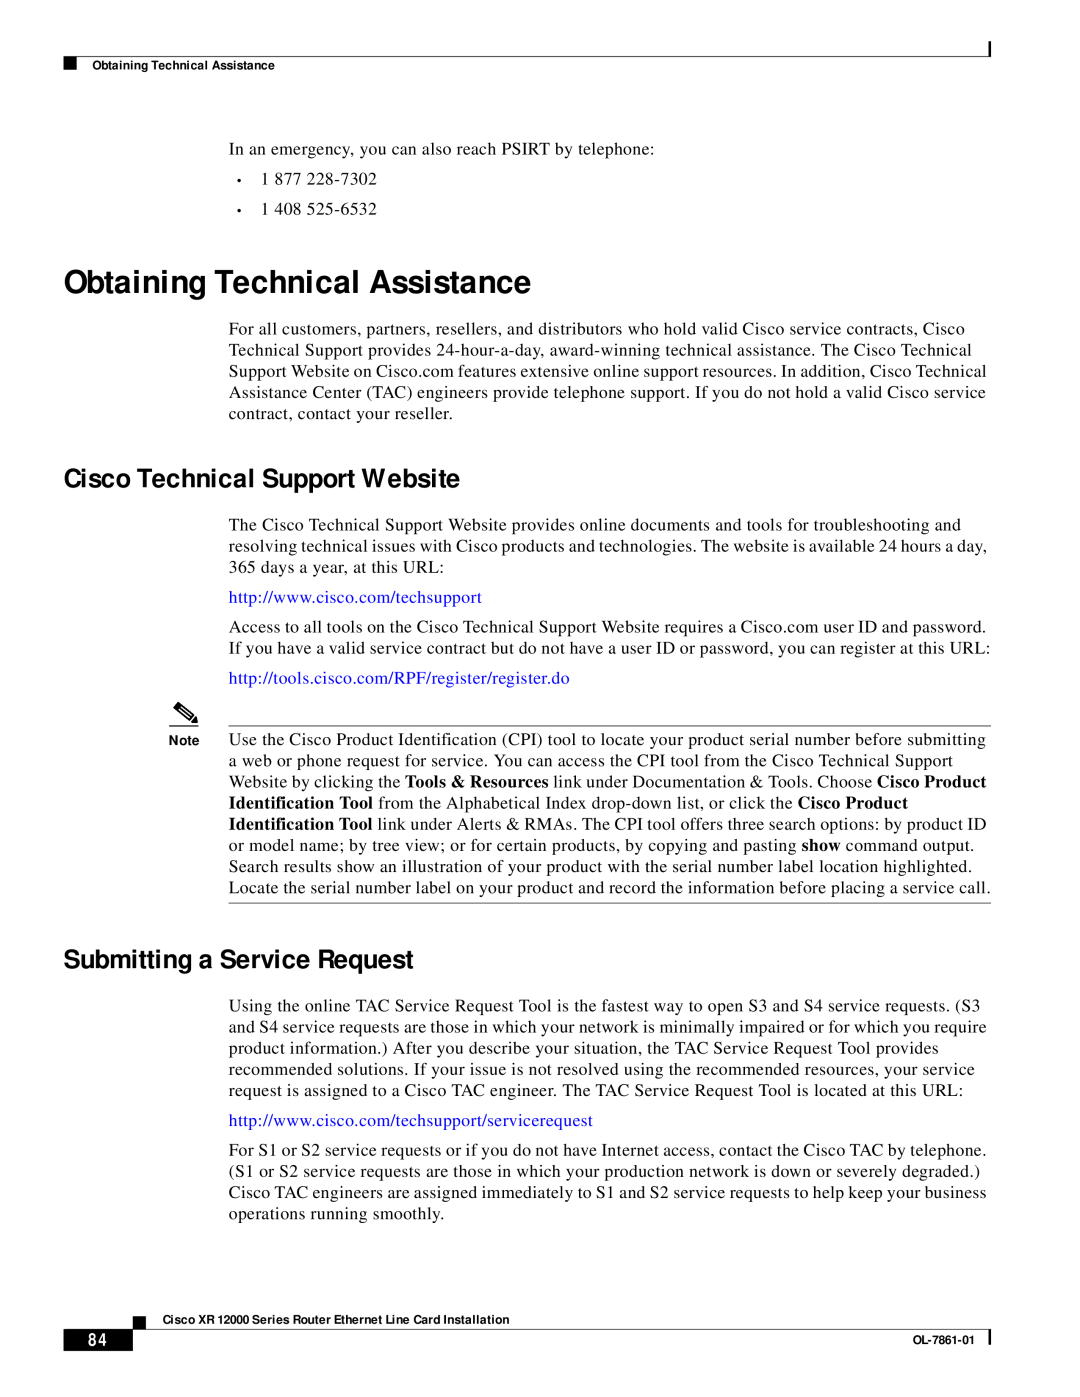 Cisco Systems OL-7861-01 Obtaining Technical Assistance, Cisco Technical Support Website, Submitting a Service Request 